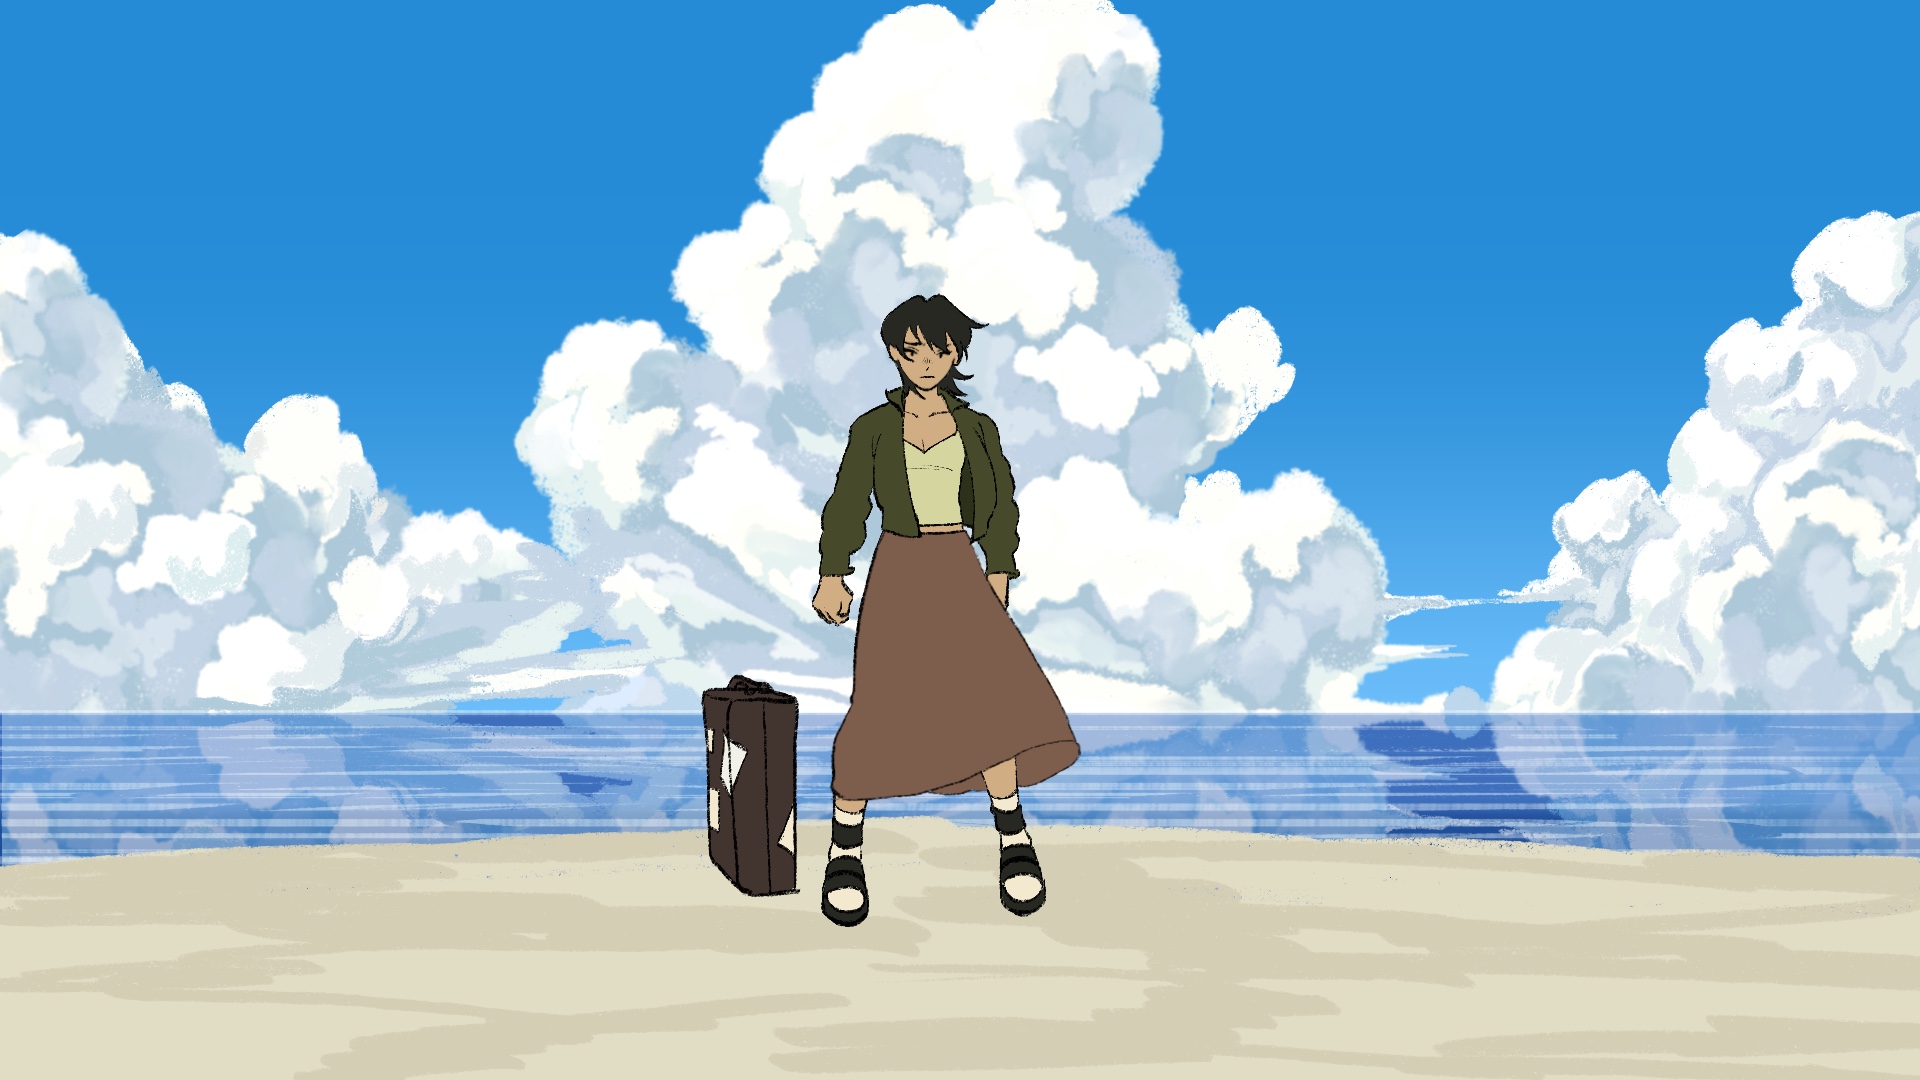 Illustration of girl standing on beach with suitcase